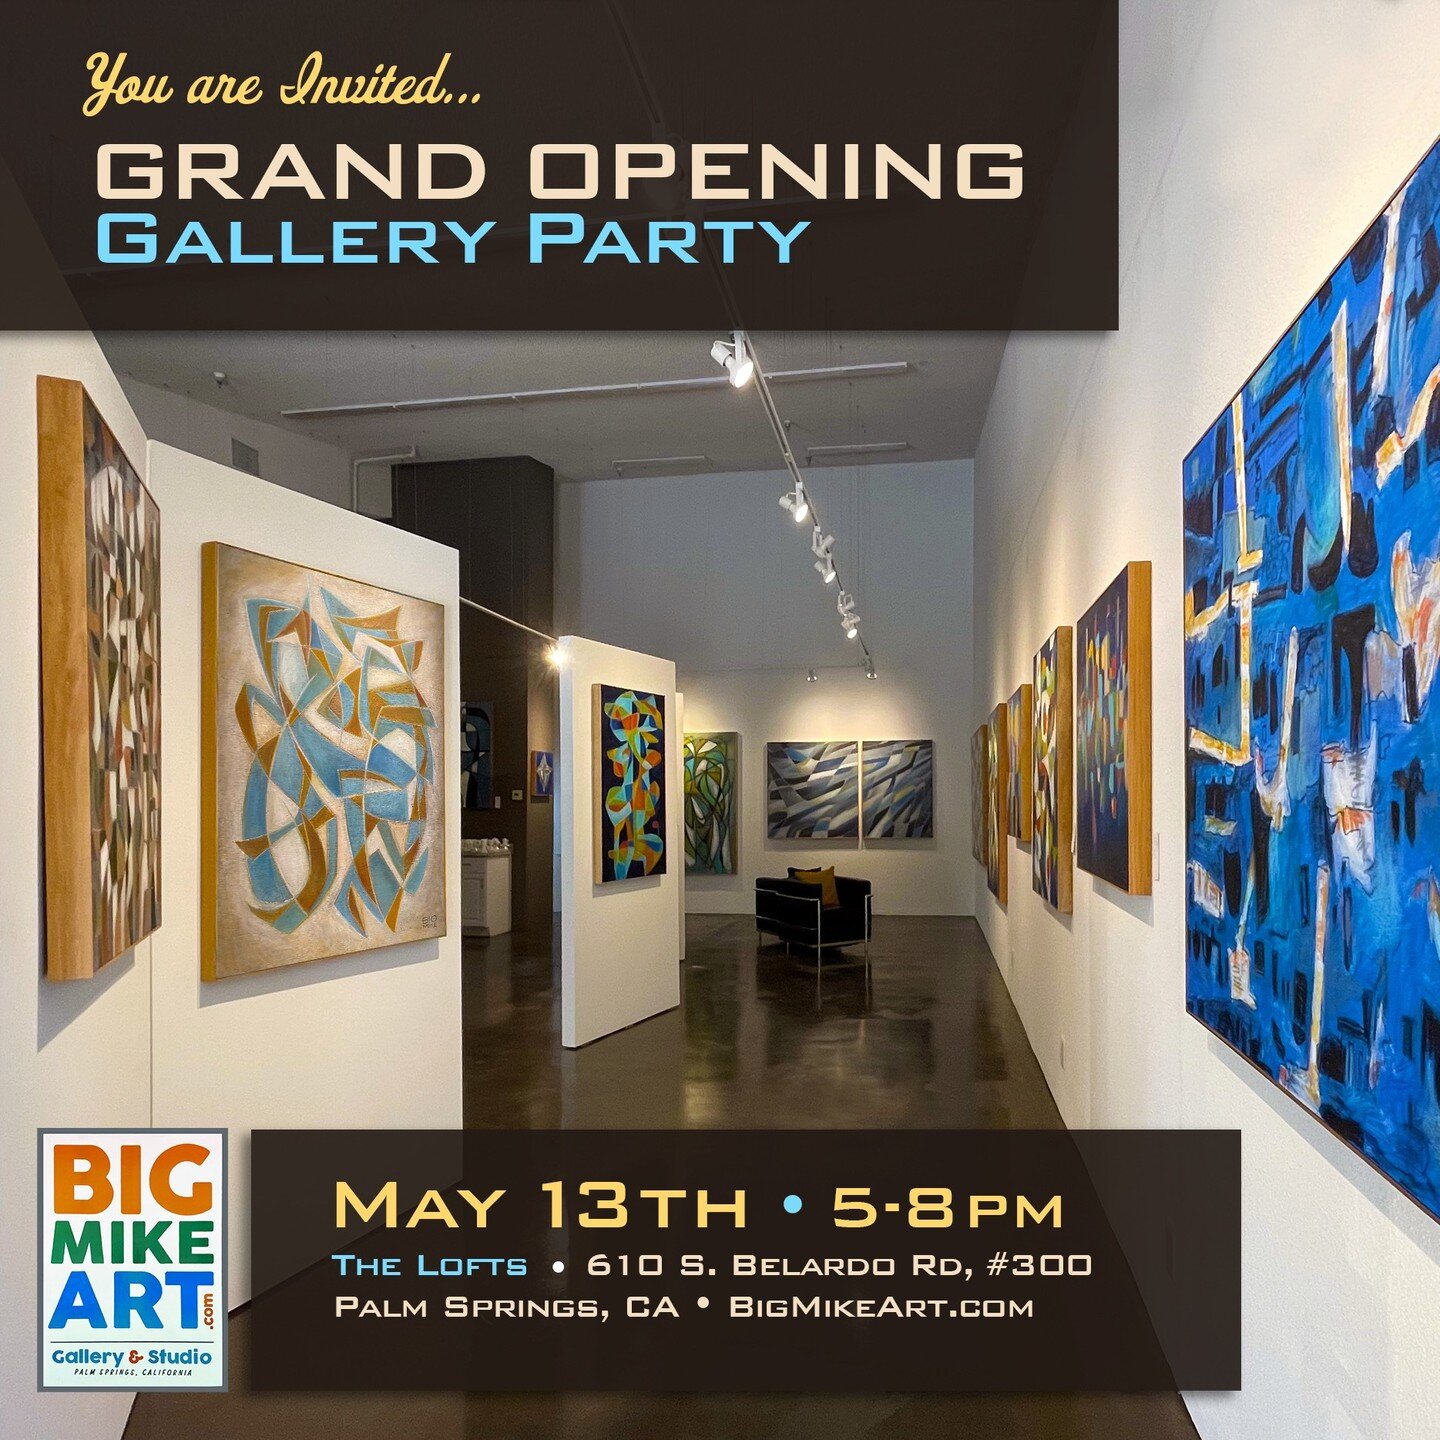 So, I did a thing&hellip;
You are invited to the Grand Opening Celebration of the New Big Mike Art - Gallery &amp; Studio location!
Still in the The Lofts building @ Sun Center, the new space has taken blood, sweat and maybe a few tears to get into s